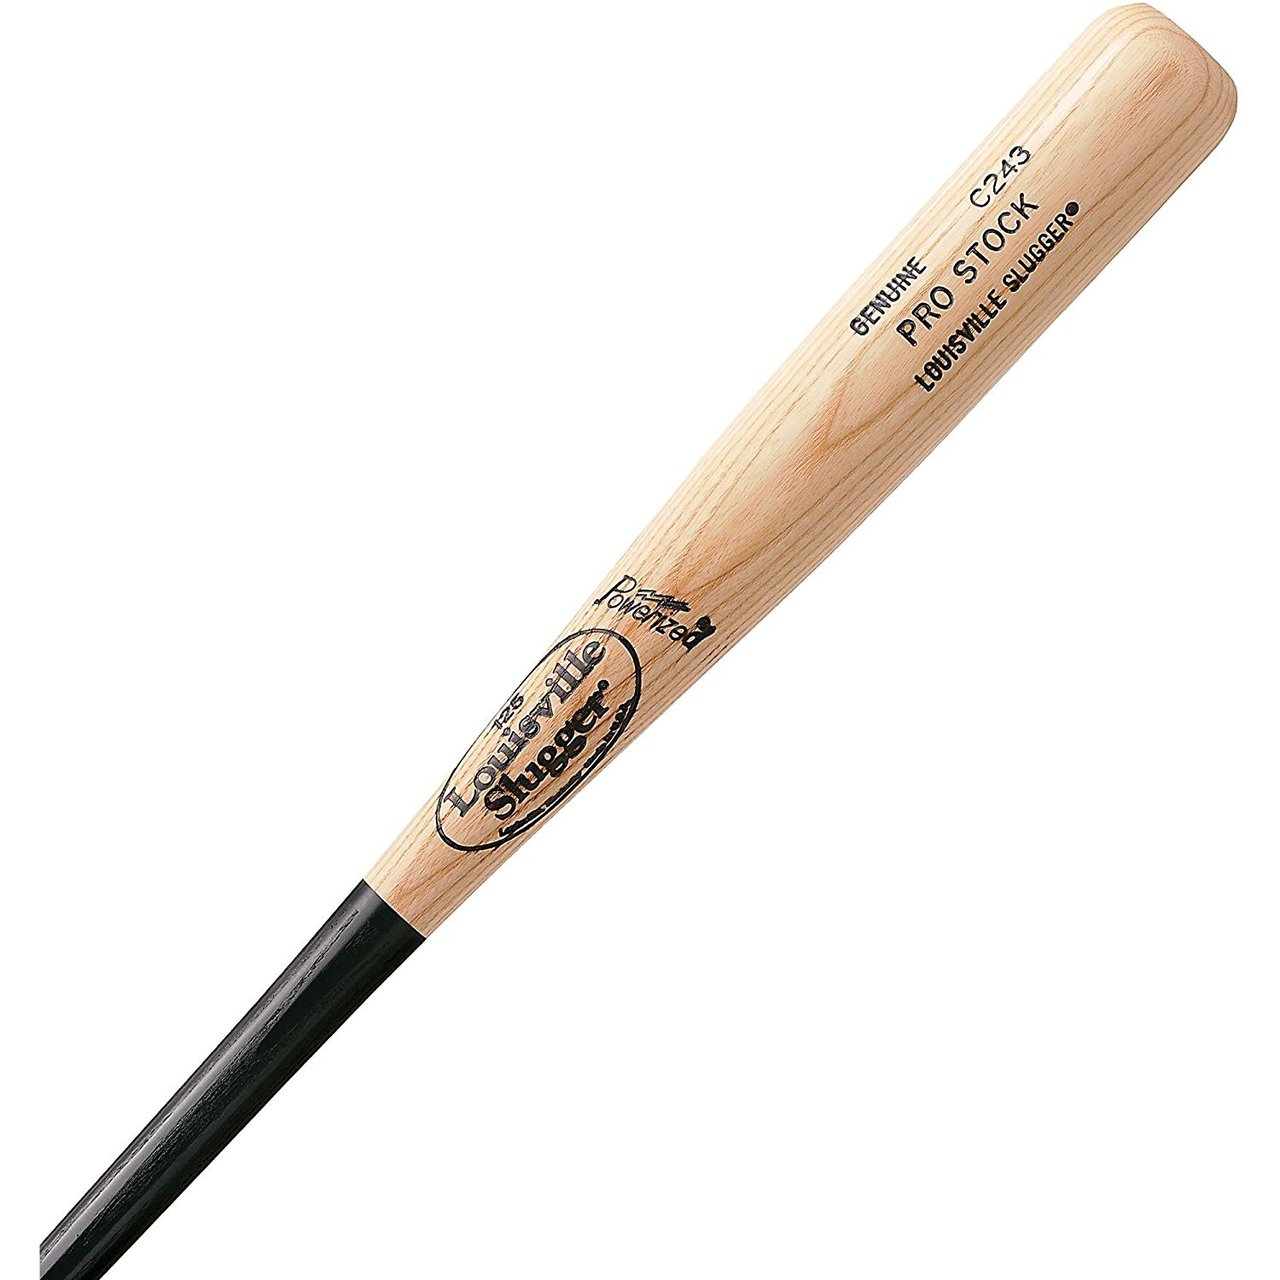 Pro Stock Northern White Ash C243 Extra large barrel turning model features a balanced swing weight for greater bat speed and is the same turning model of NL MVP Buster Posey Cupped end provides a lighter more balance swing weight for greater bat speed Black handle and natural barrel finish 15/16 handle available in 32, 33 and 34 For over 125 years, weve dominated the batters box in Major League Baseball. Still to this day, more teams and players -from rising stars to All-Stars -swing Slugger than any other brand. What do they know that other players don't. No other bat combines heritage, expertise and passion for the game like Louisville Slugger. We use superior lumber and superior craftsmanship to create a better, harder and longer-lasting bat. don't. Make the mistake of thinking all wood bats are the same. They may look similar, but the quality of wood is very different from one wood bat company to another. Louisville Slugger sets itself apart from other bat makers with over 125 years of bat making experience, outstanding turning models and the ability to offer the best quality wood on the market. This quality comes at a price. Louisville Slugger bats can be more expensive than other bats because we use only the very best timber to make our bats. With wood bats, you get what you pay for. Cheaply priced wood bats usually mean cheap-quality wood. The C243 turning model is very popular for Louisville Slugger due to its extra large barrel that provides a player with one of the biggest sweet spots for a wood bat. The C243 has a beautiful two tone popular finish in a black handle and natural barrel. The C243 is also used by NL MVP Buster Posey, a player who has grown up swinging the best bats in baseball, Louisville Slugger. The cupped end makes the bat even more balanced for quicker bat speed.